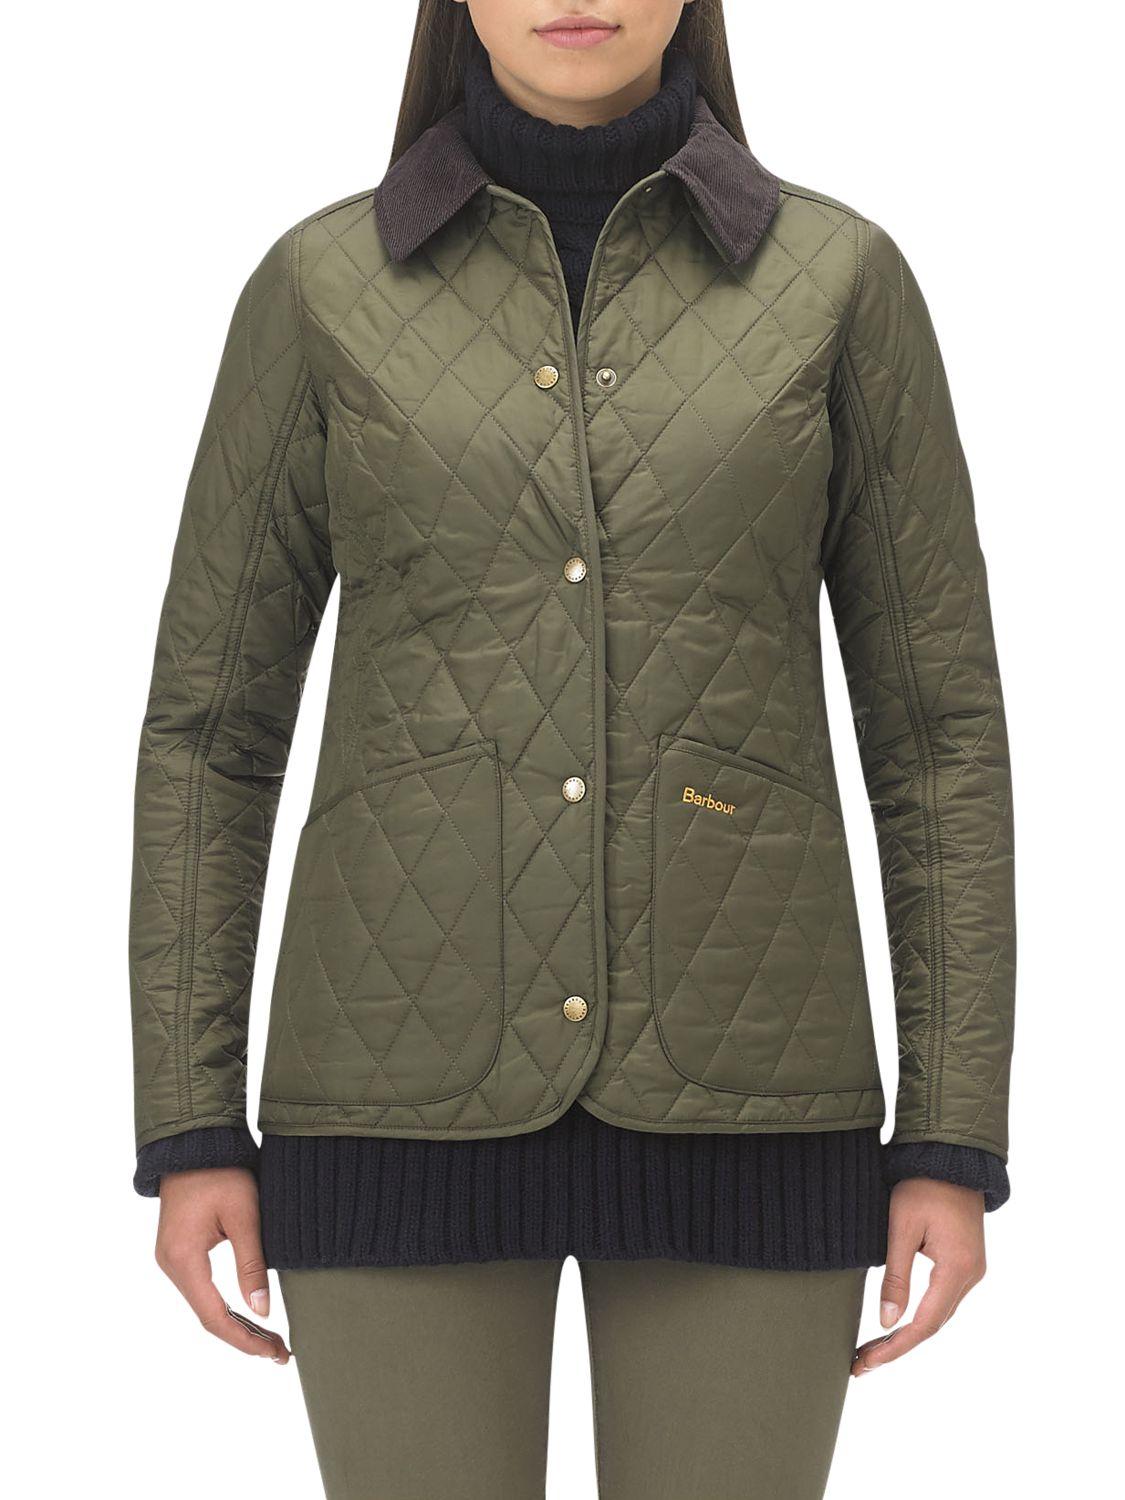 Barbour Annandale Quilted Jacket, Olive at John Lewis & Partners